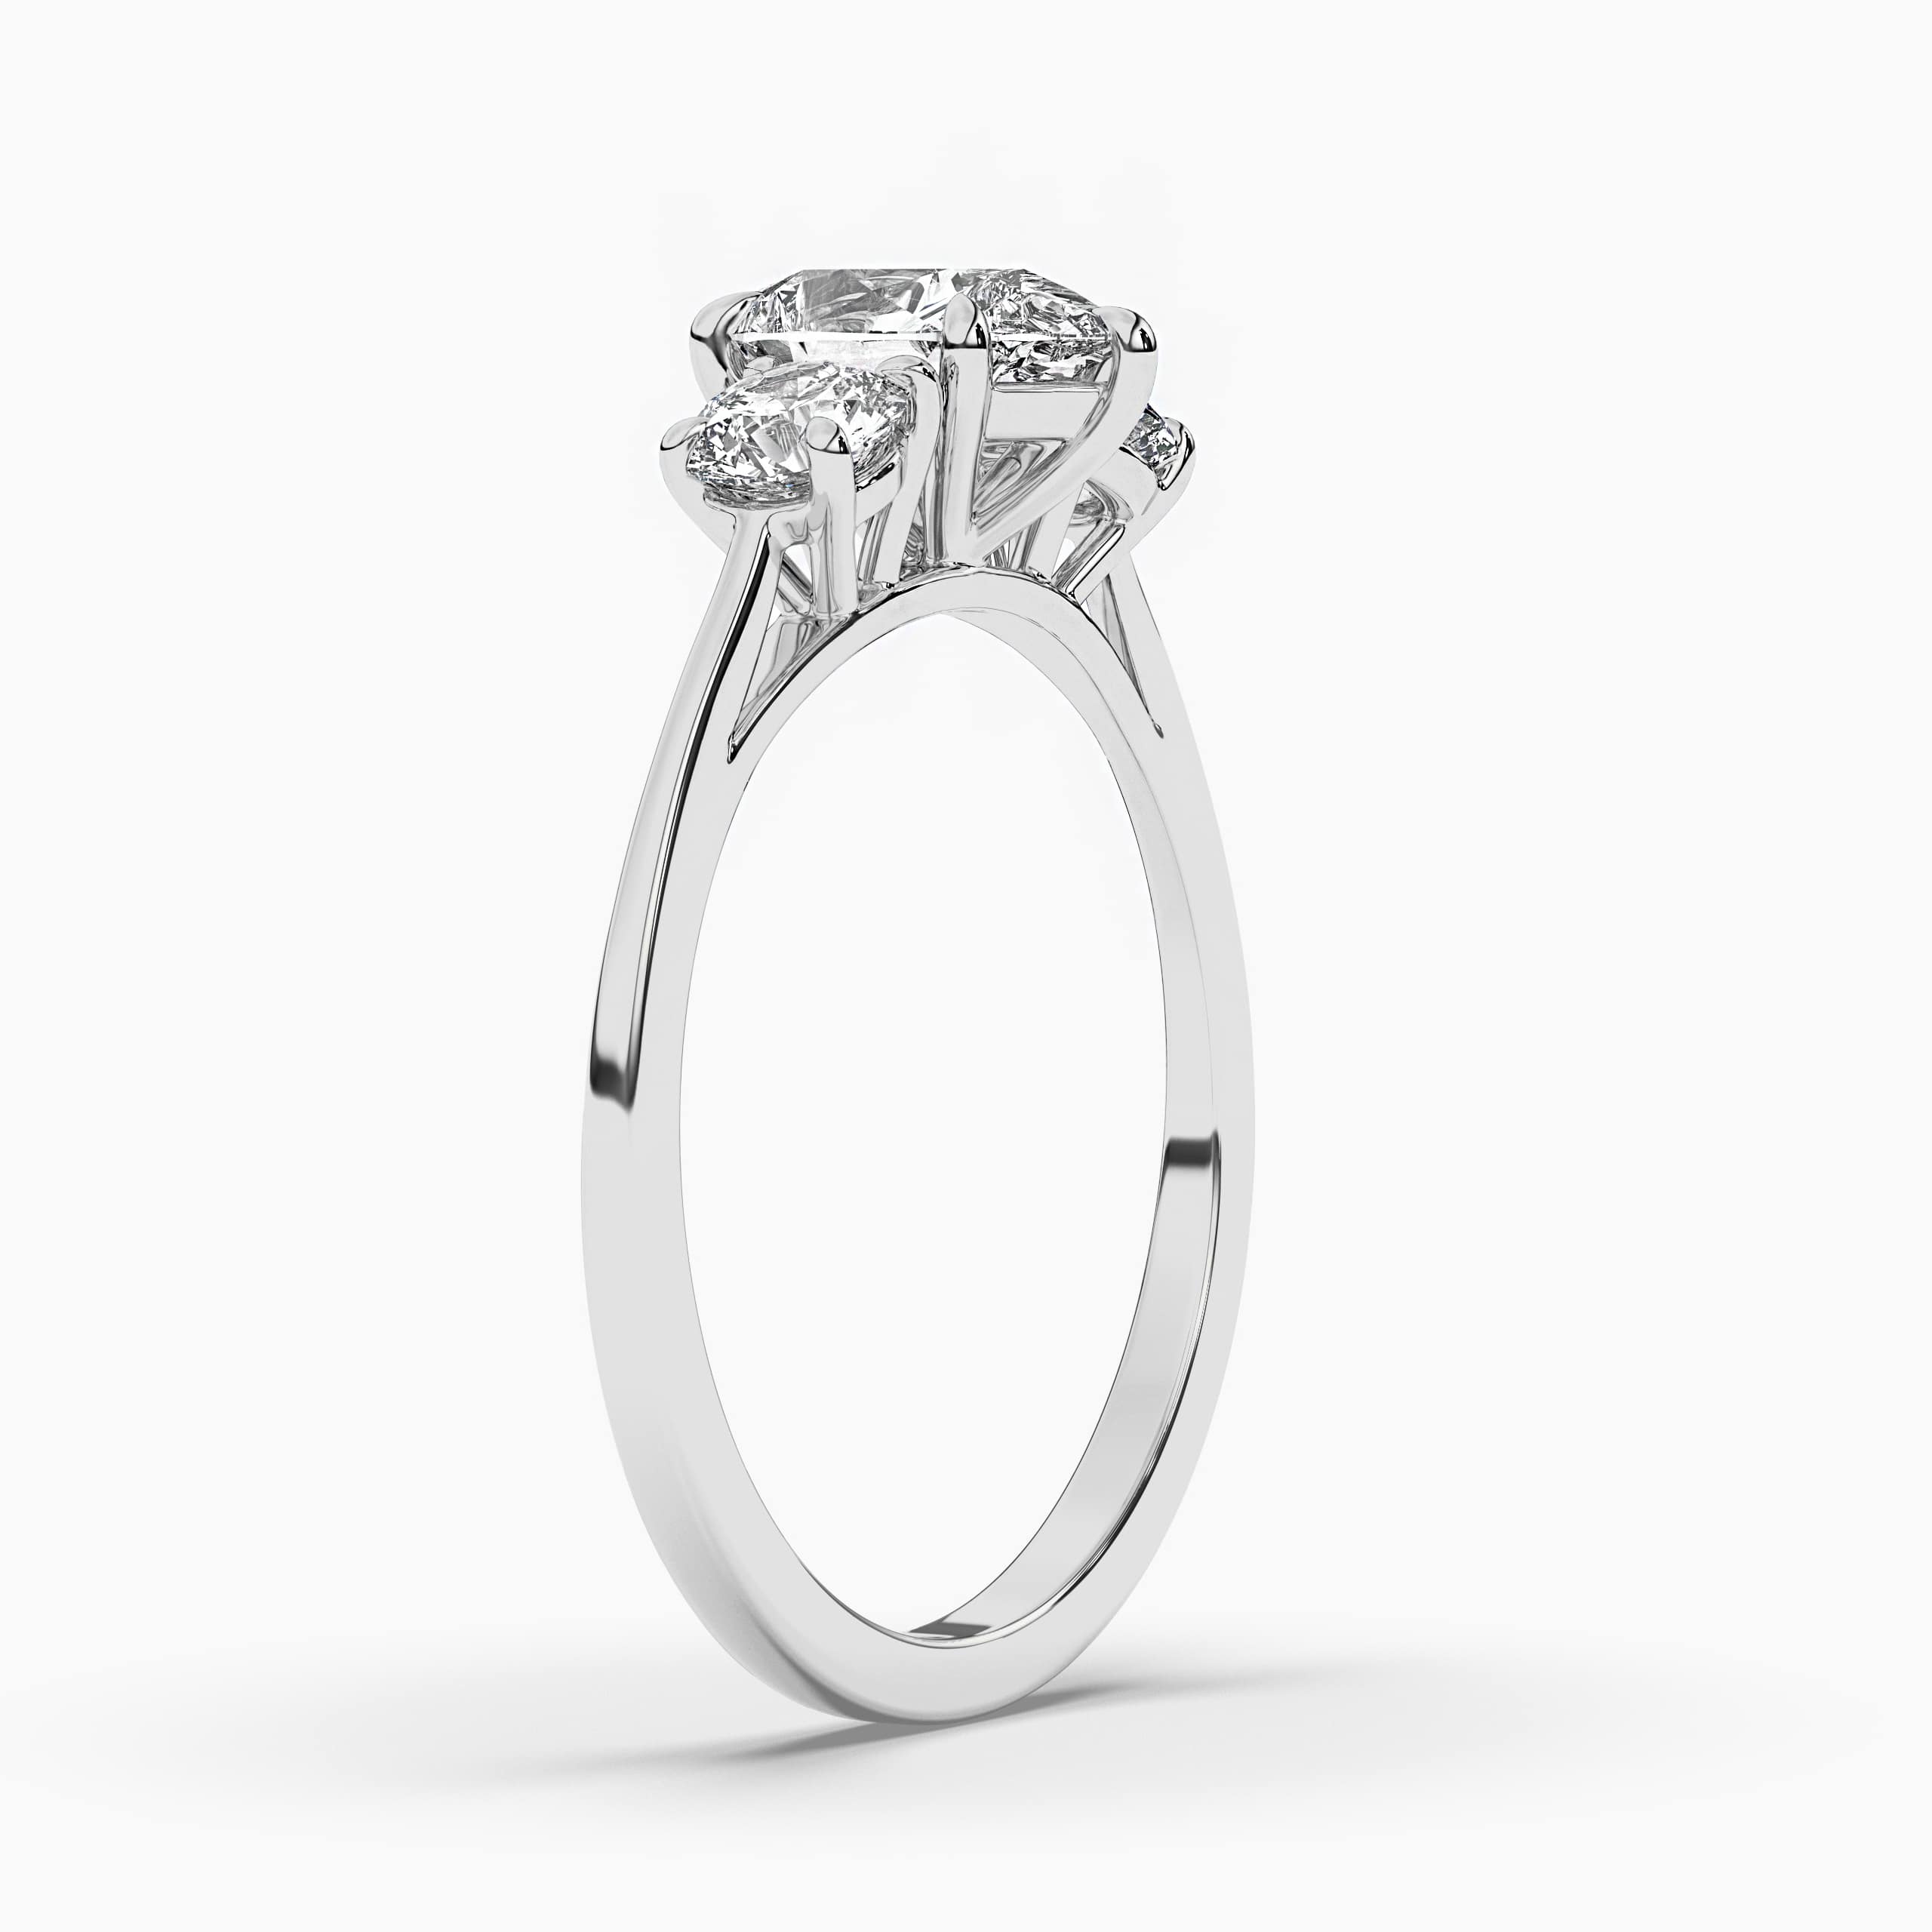 WHITE GOLD THREE STONE DIAMOND ENGAGEMENT RING WITH PEAR SHAPED SIDE STONES